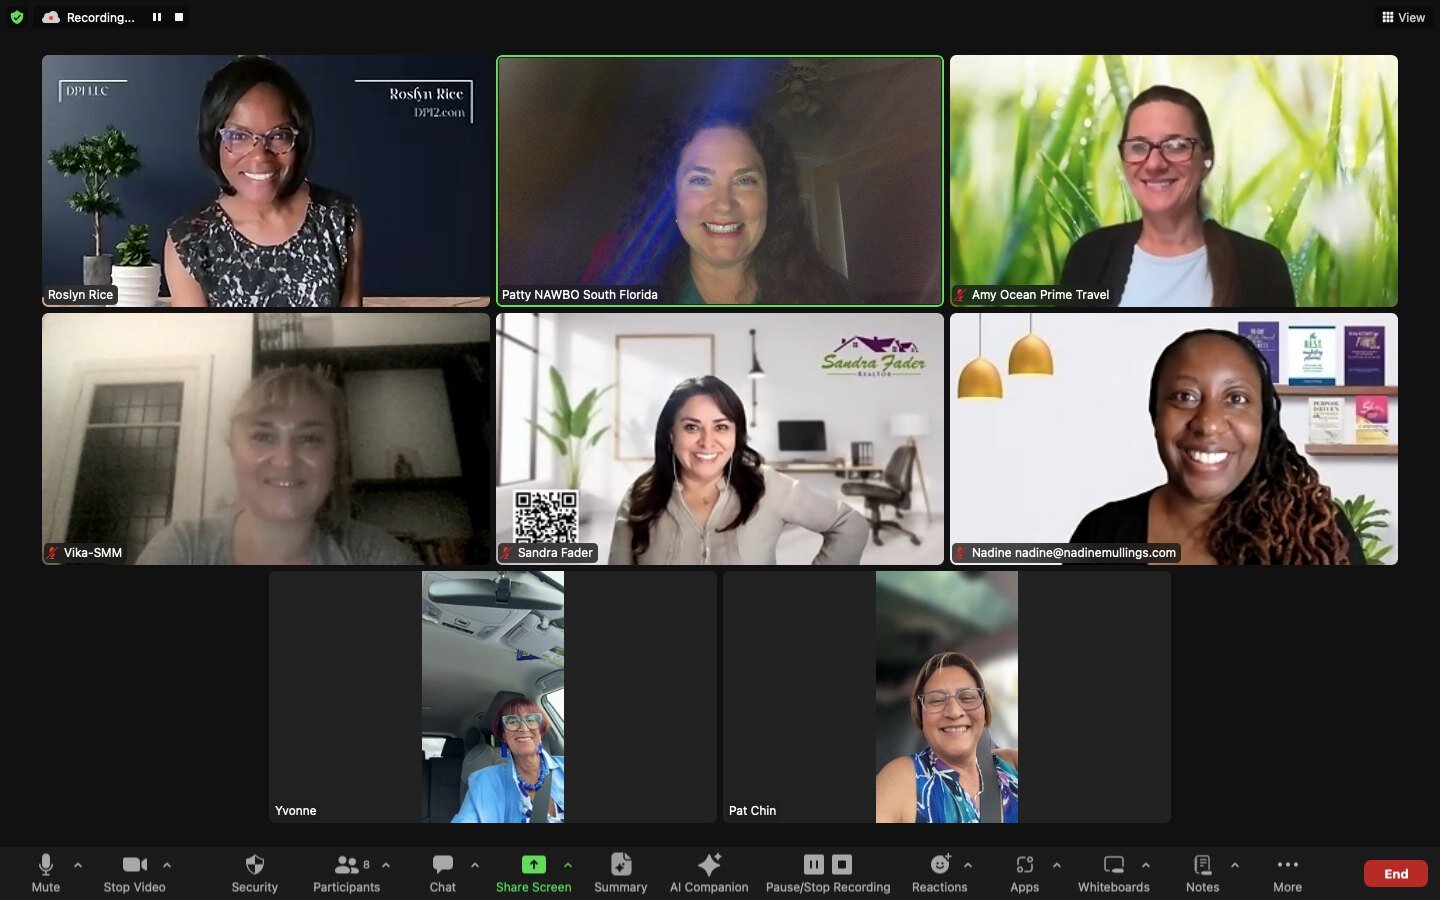 Another Virtual Power Hour is in the books! A good time was had by all. We talked about what we have launching this spring in our businesses and everyone was very excited about new projects, new ideas, new leads, new strategies. 

It was great to con